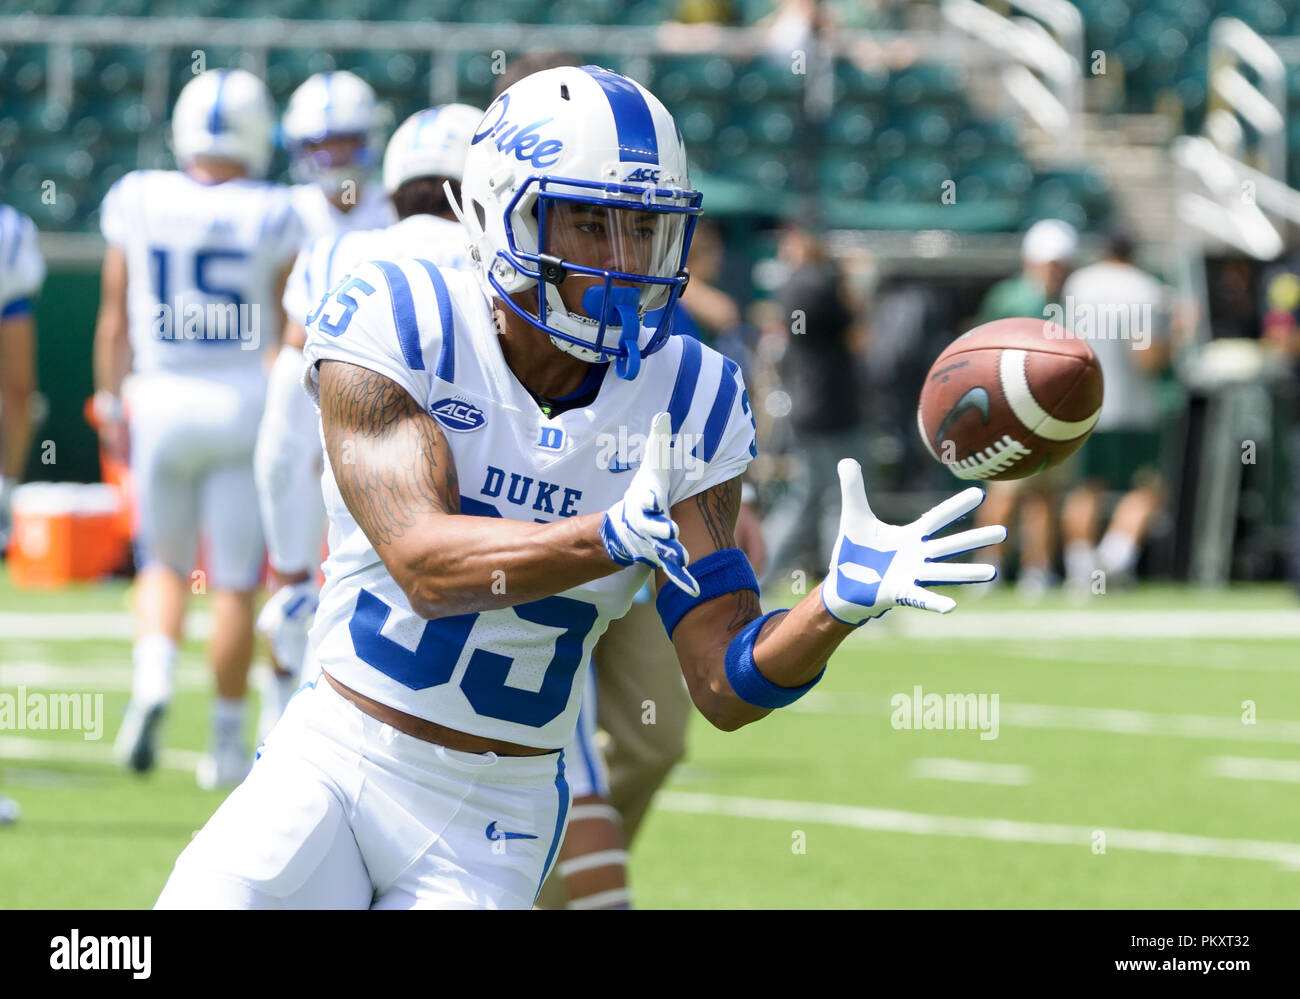 Waco, Texas, USA. 15th Sep, 2018. Duke Blue Devils safety Leonard Johnson (33) catches a pass before the NCAA Football game between the Duke Blue Devils and the Baylor Bears at McLane Stadium in Waco, Texas. Matthew Lynch/CSM/Alamy Live News Stock Photo